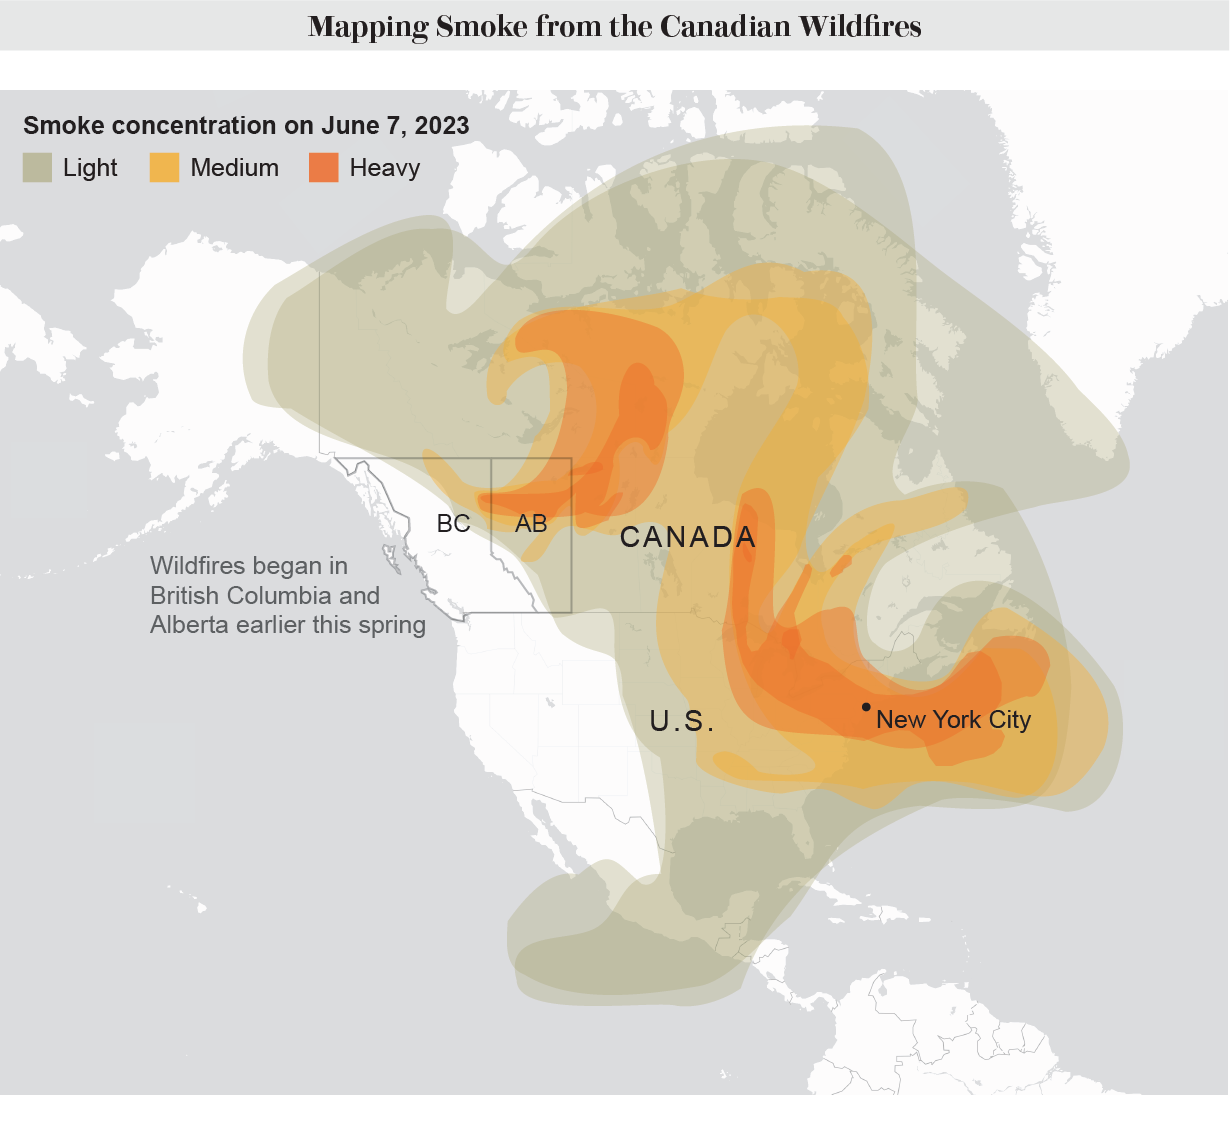 Map shows extent and concentration of smoke over North America on June 7, 2023.